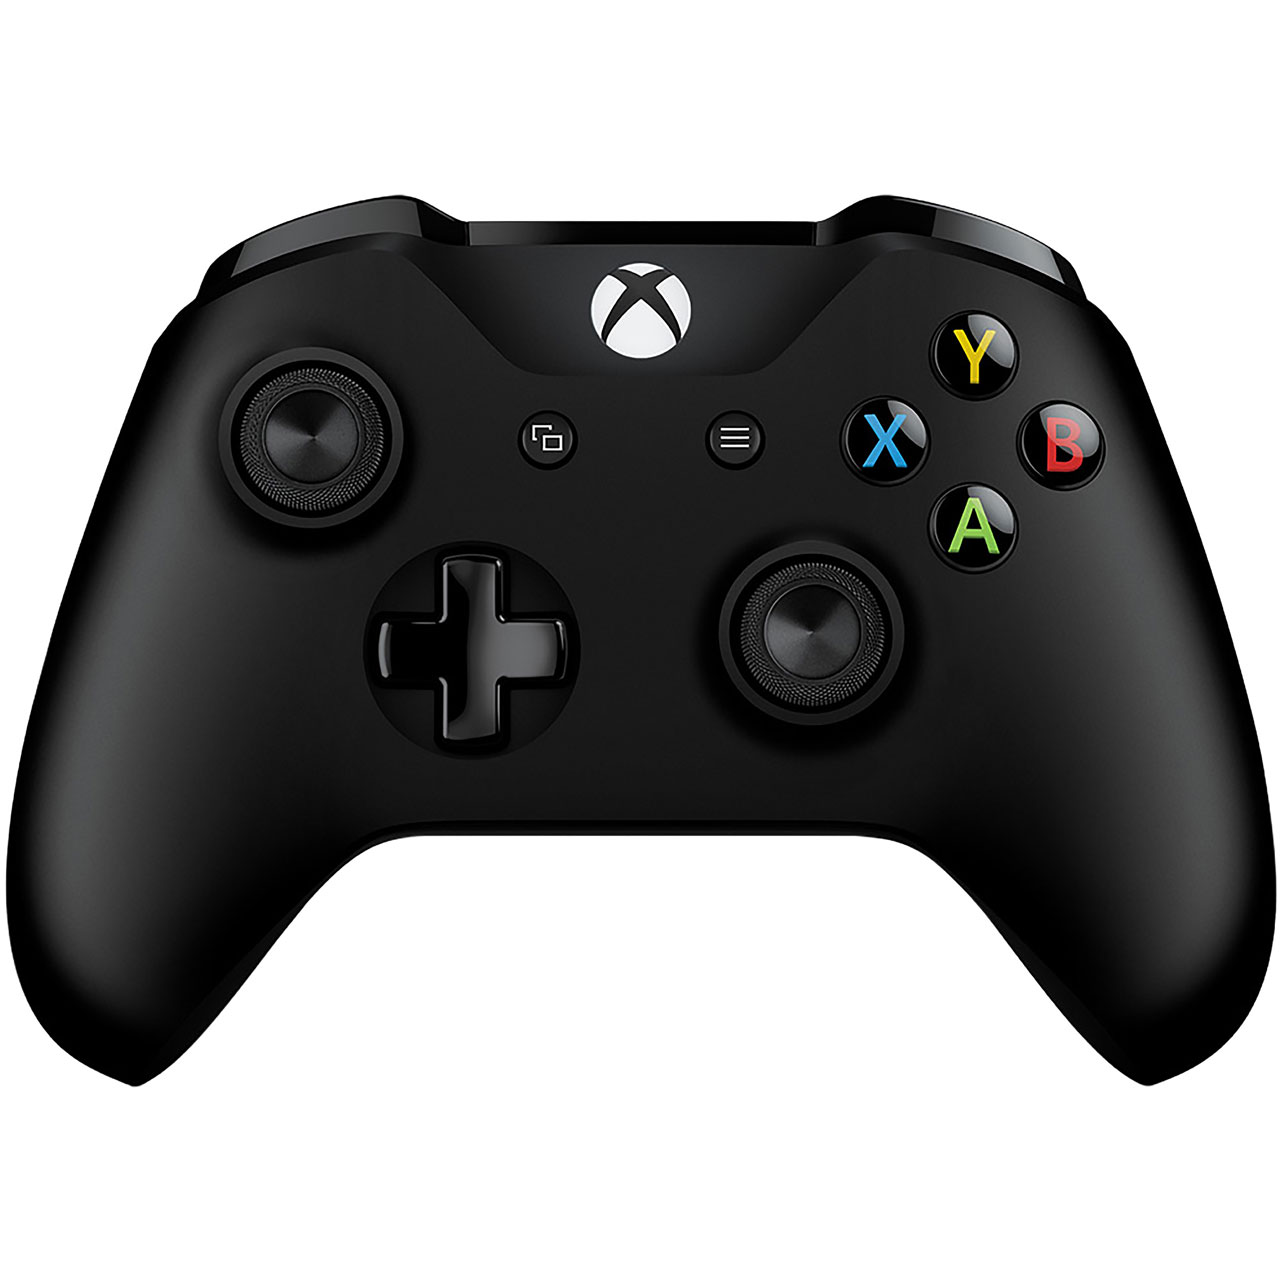 Xbox One Wireless Gaming Controller Review